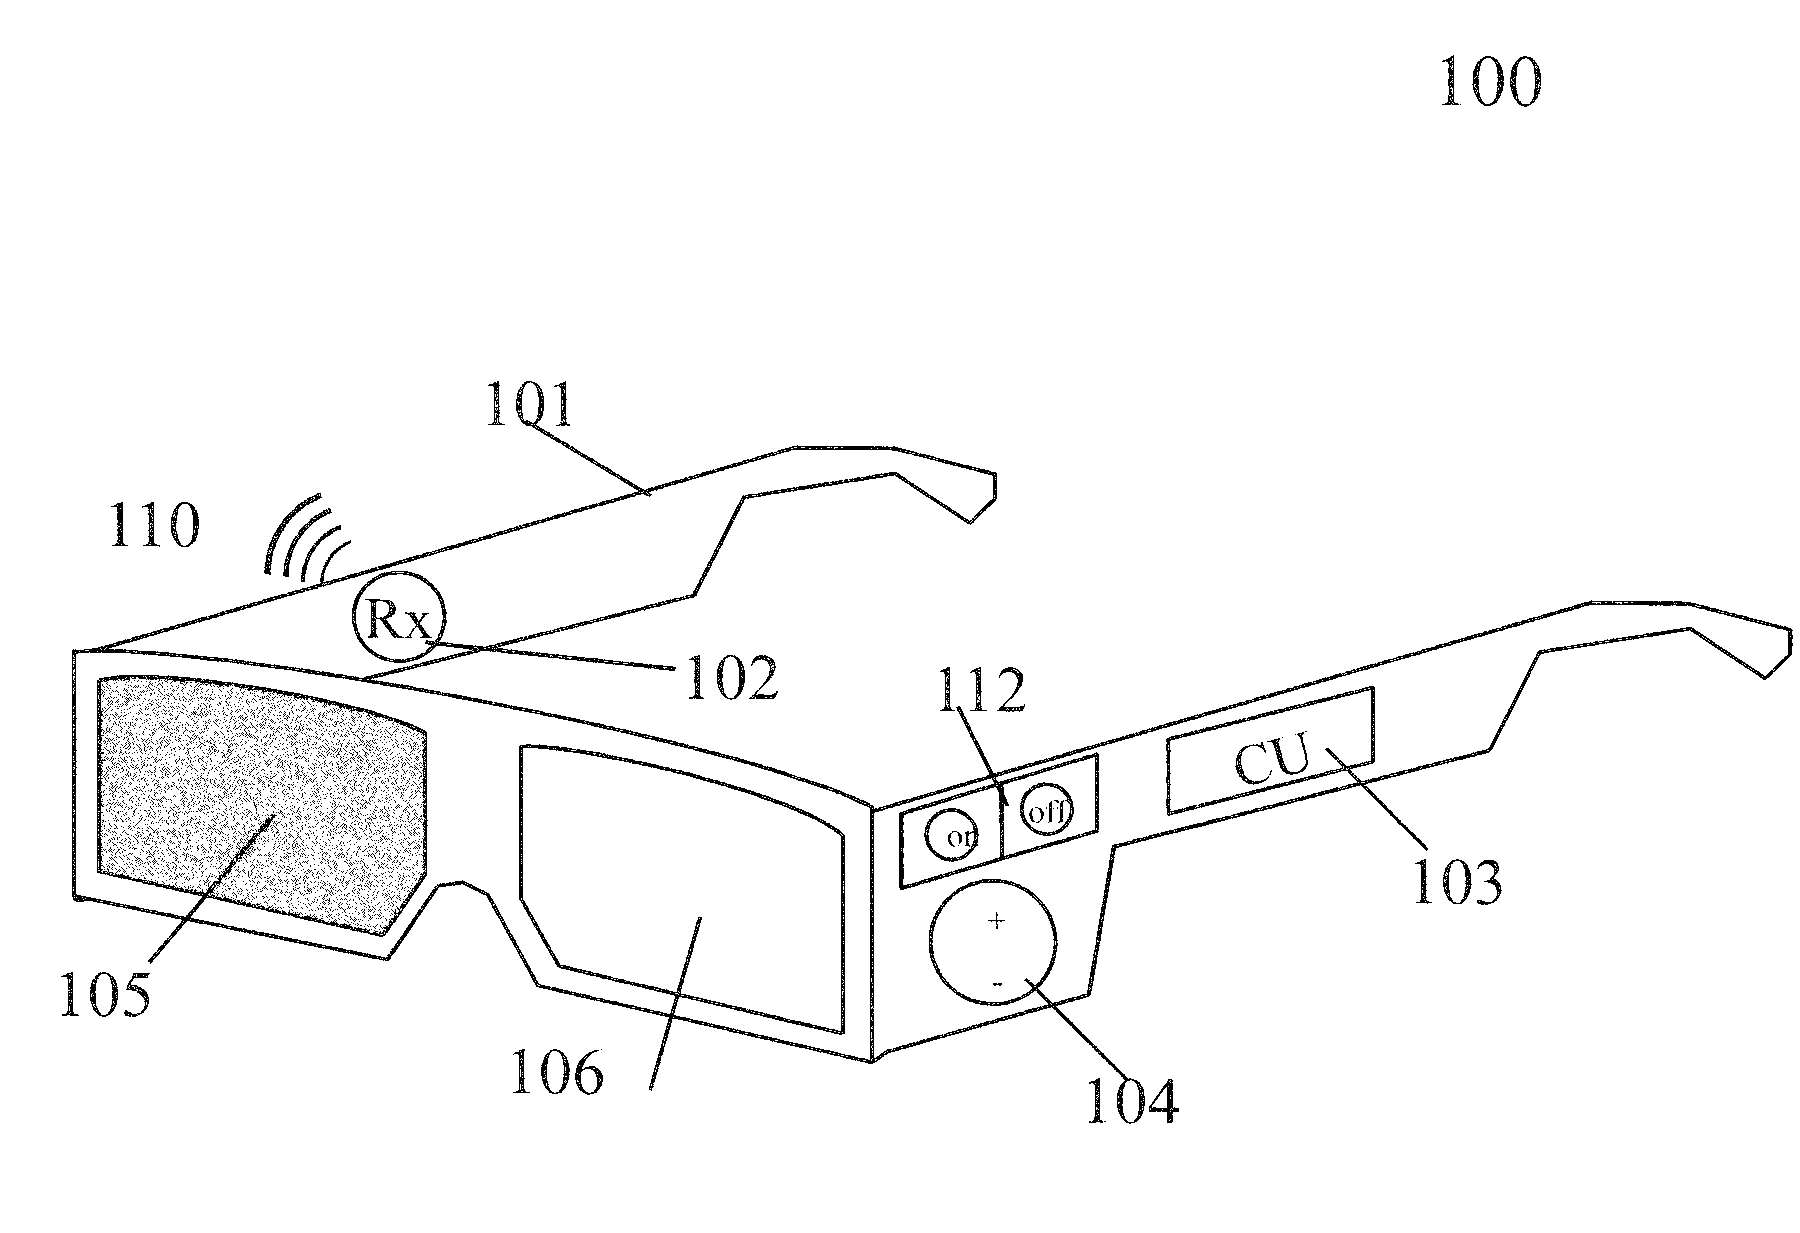 Continuous adjustable 3Deeps filter spectacles for optimized 3Deeps stereoscopic viewing and its control method and means